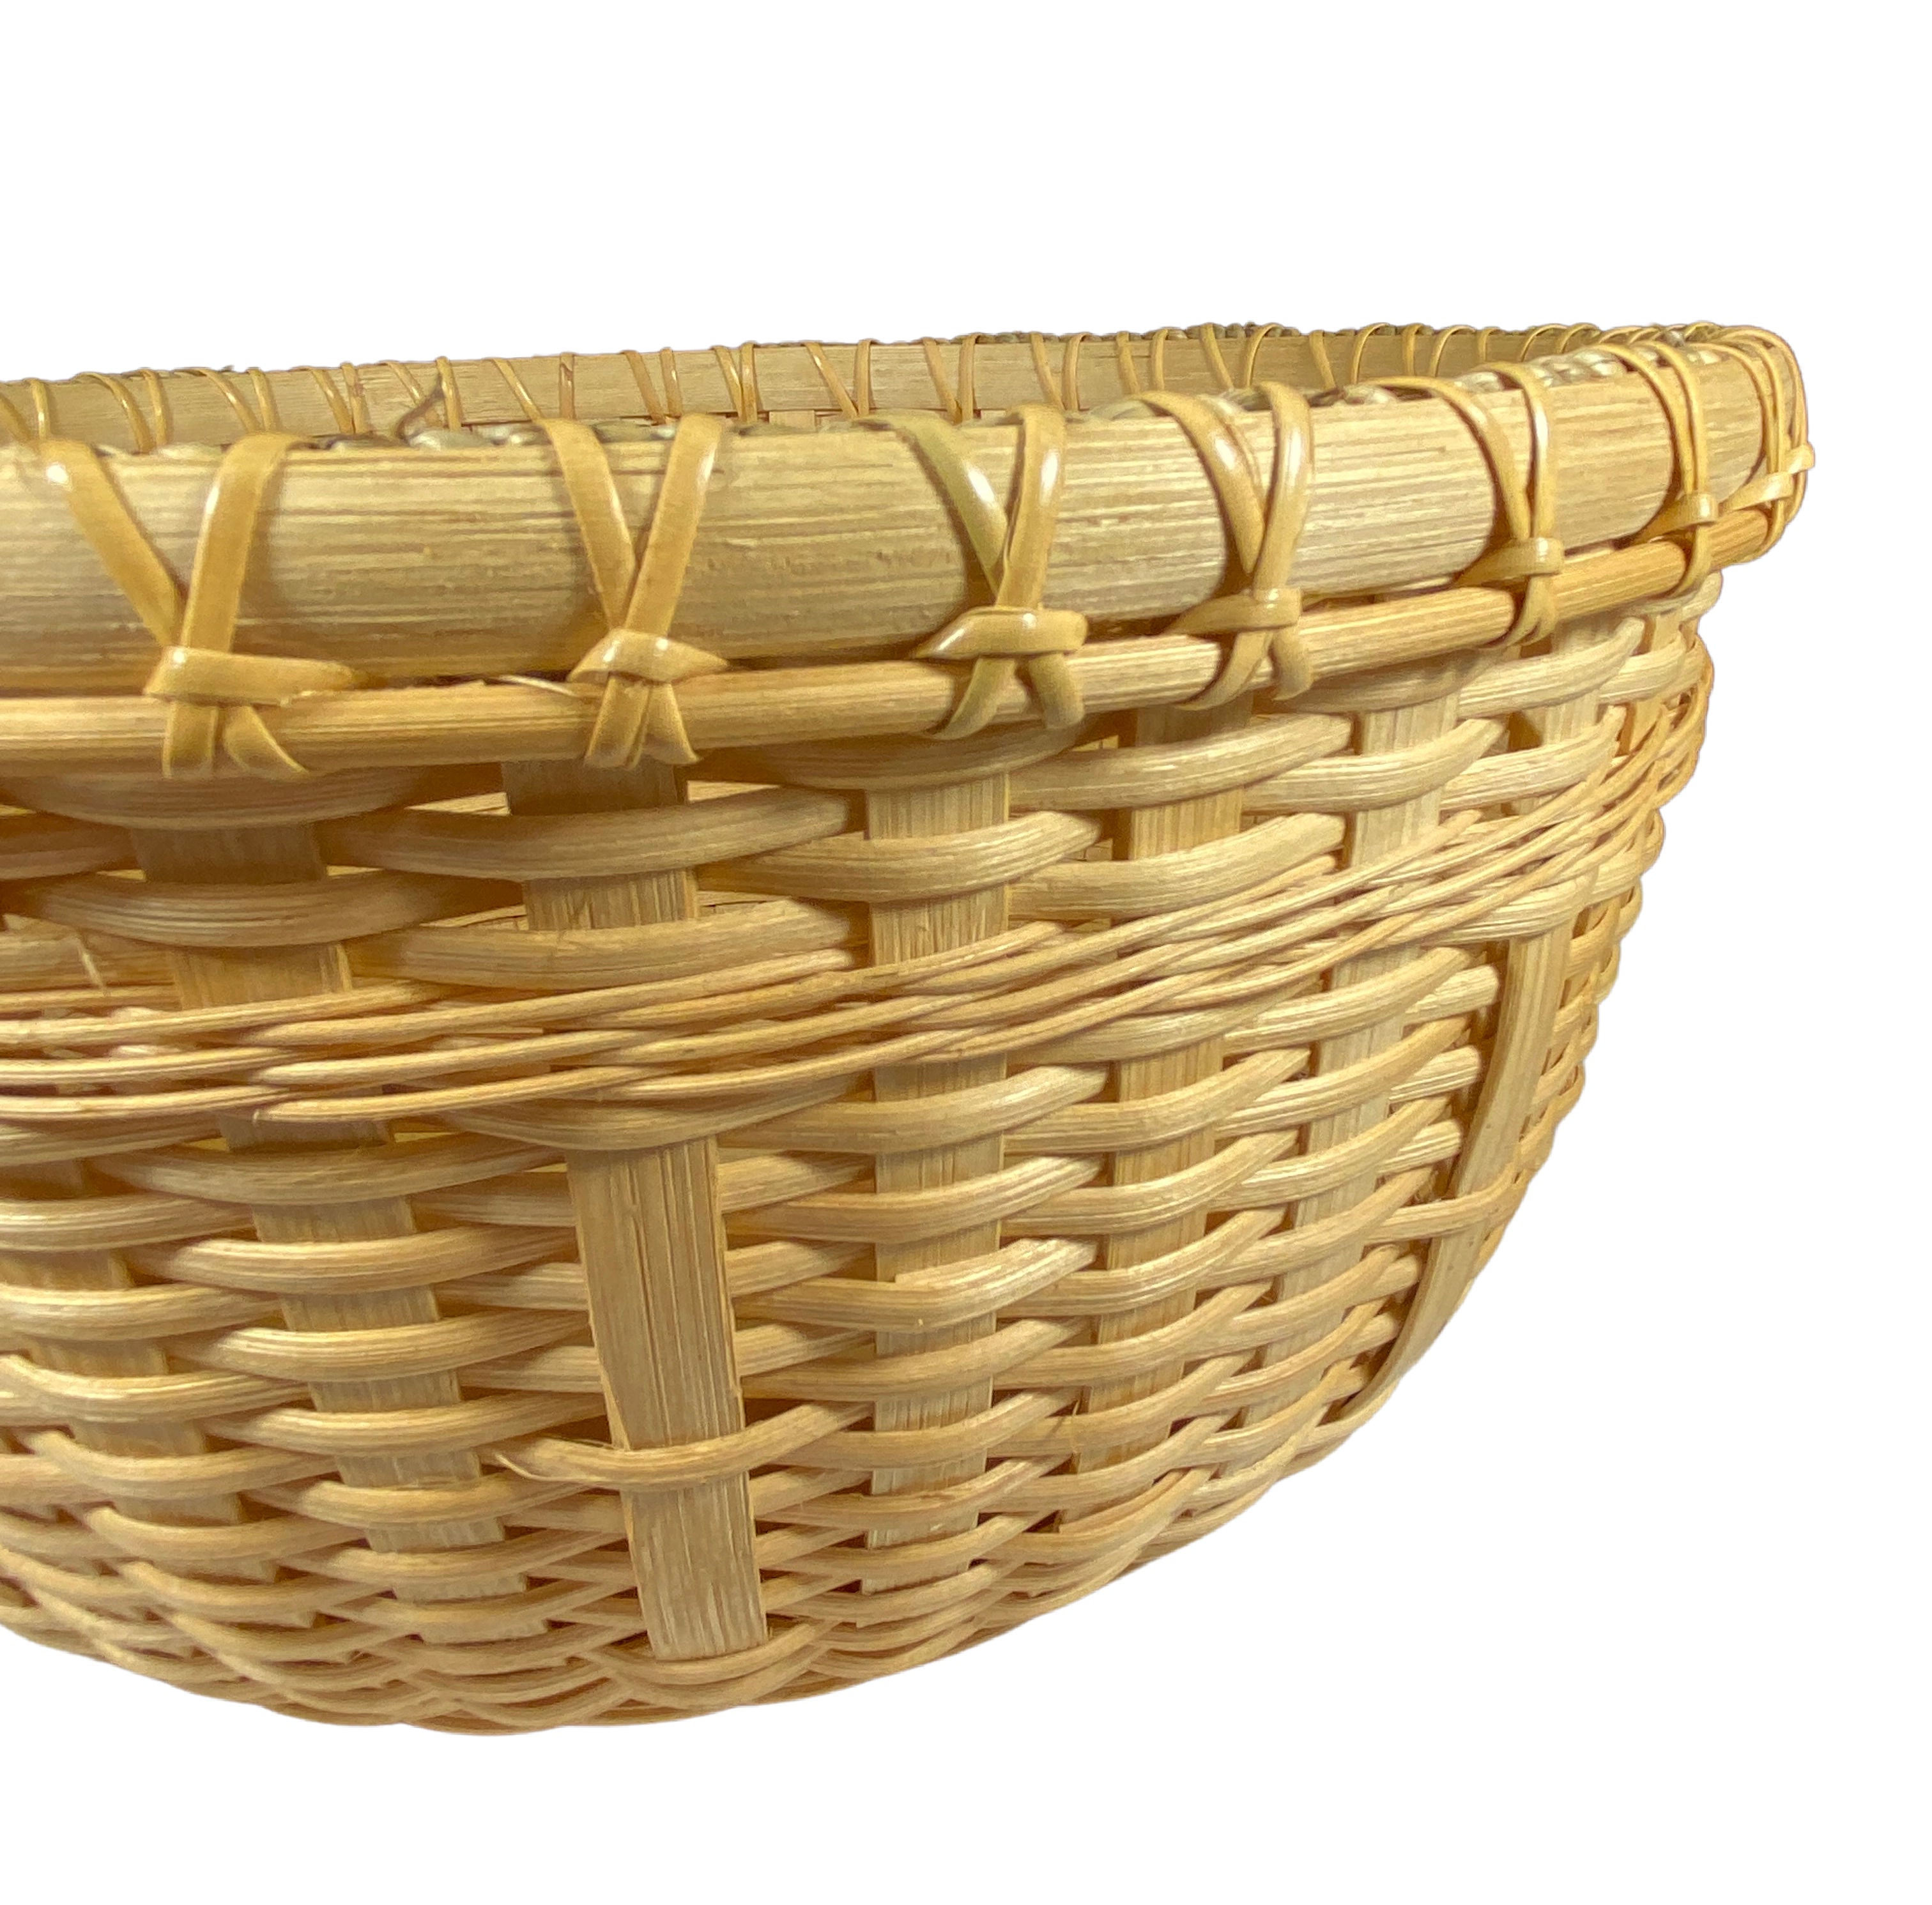 See the Cane & Basket Weaving Supplies Directory™ for your DIY projects